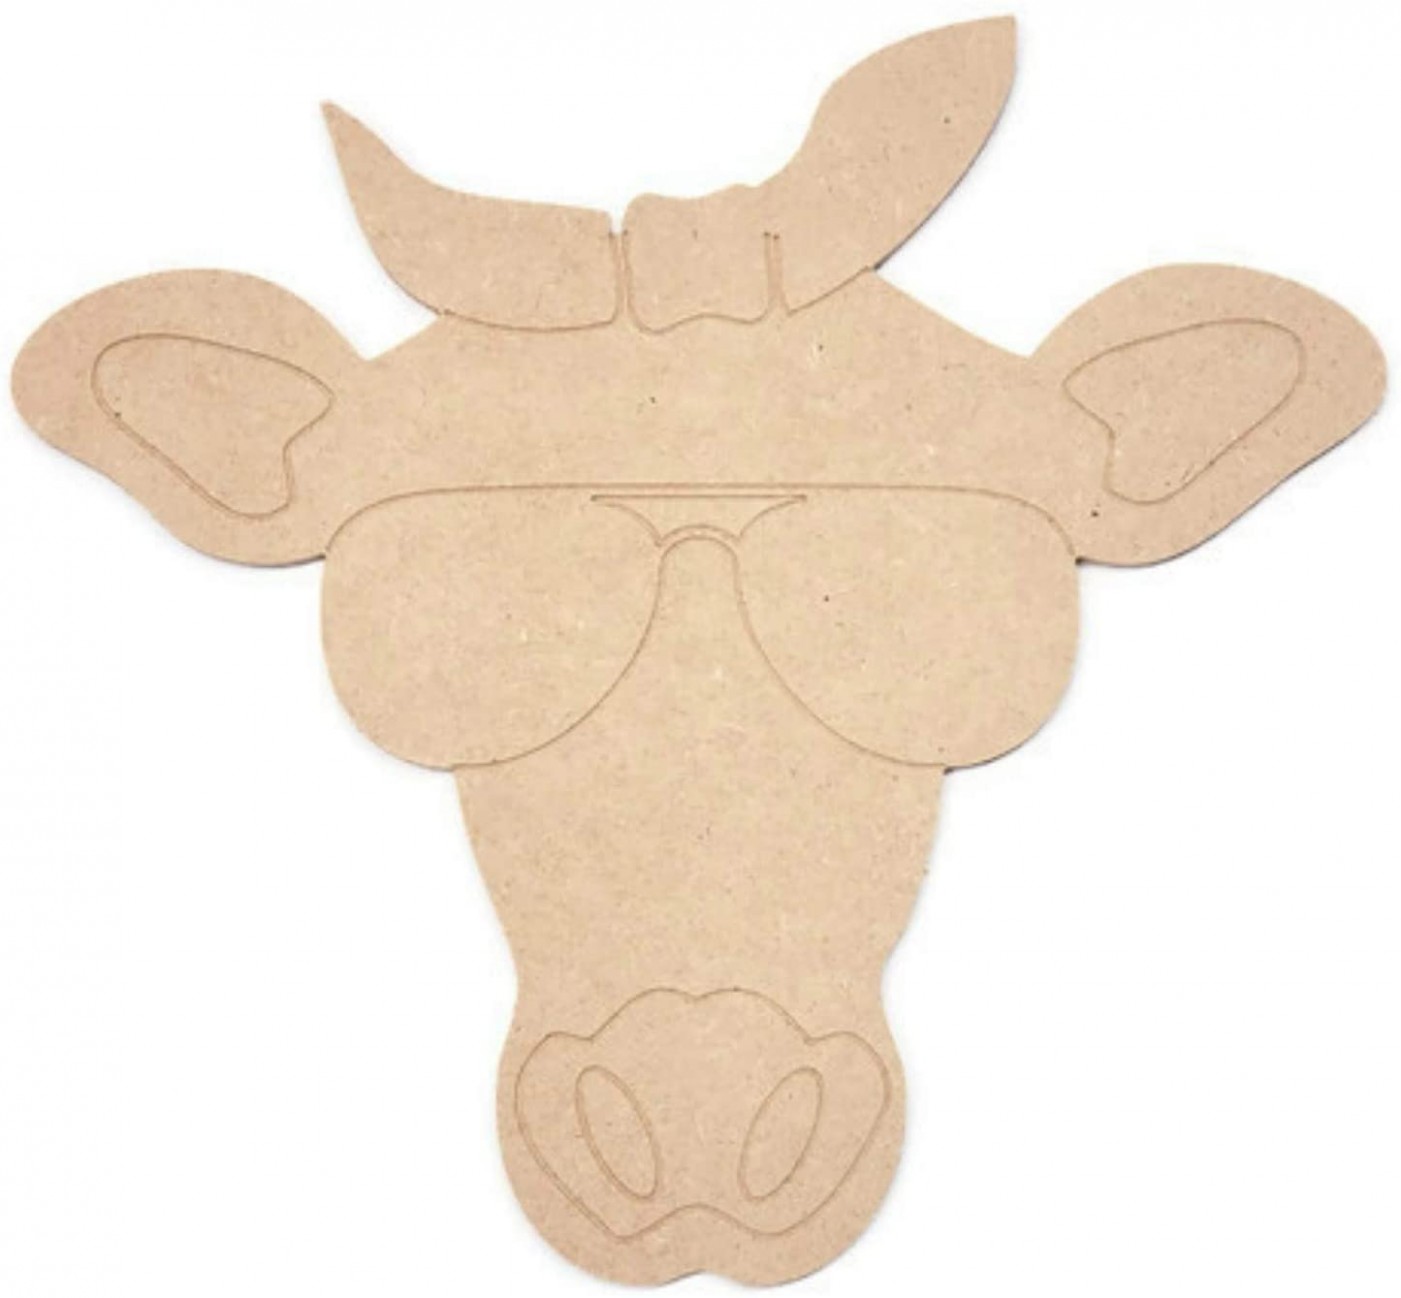 Amazon.com: Styling Cow With Shades Wood Cutout With Paint Lines ..